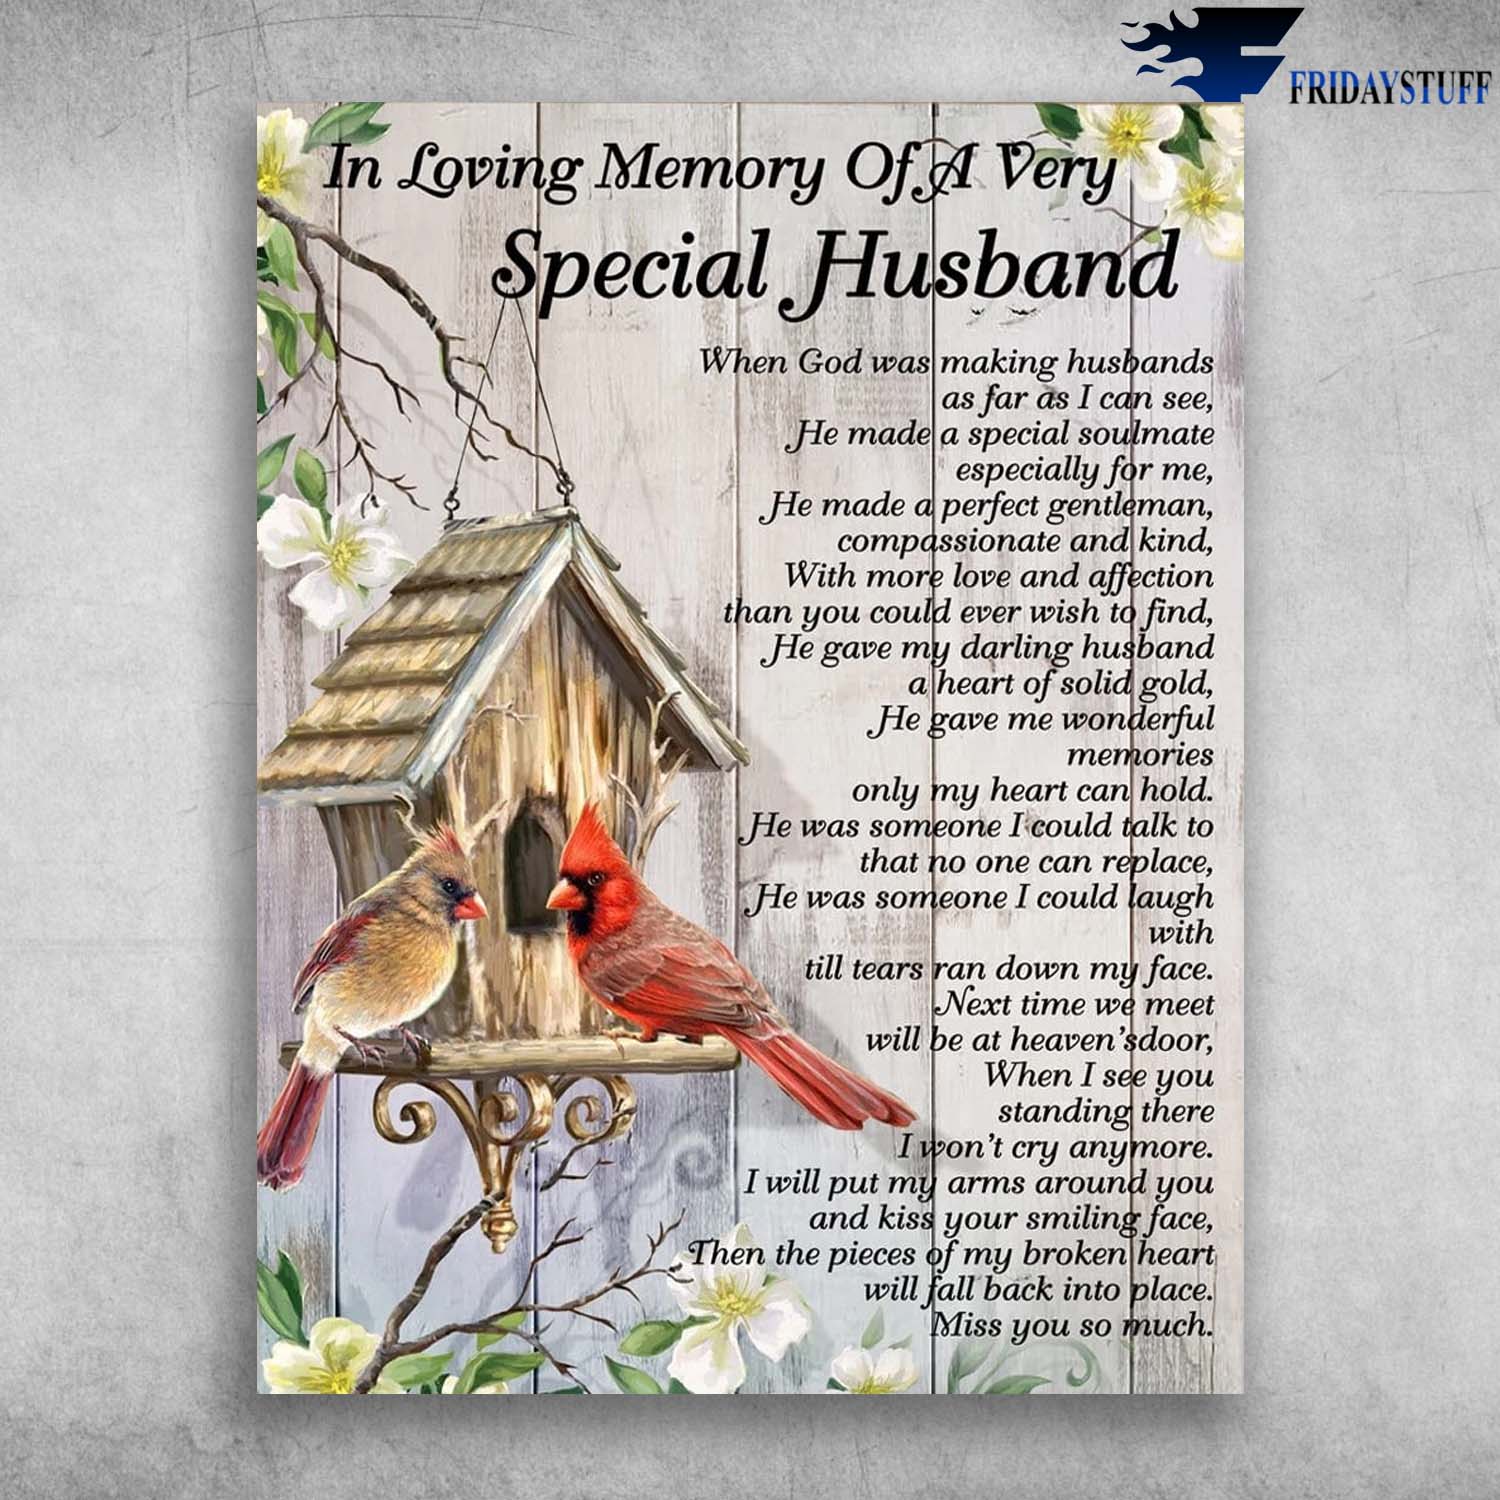 In Loving Memory Of A Very Special Husband - Cardinal Bird